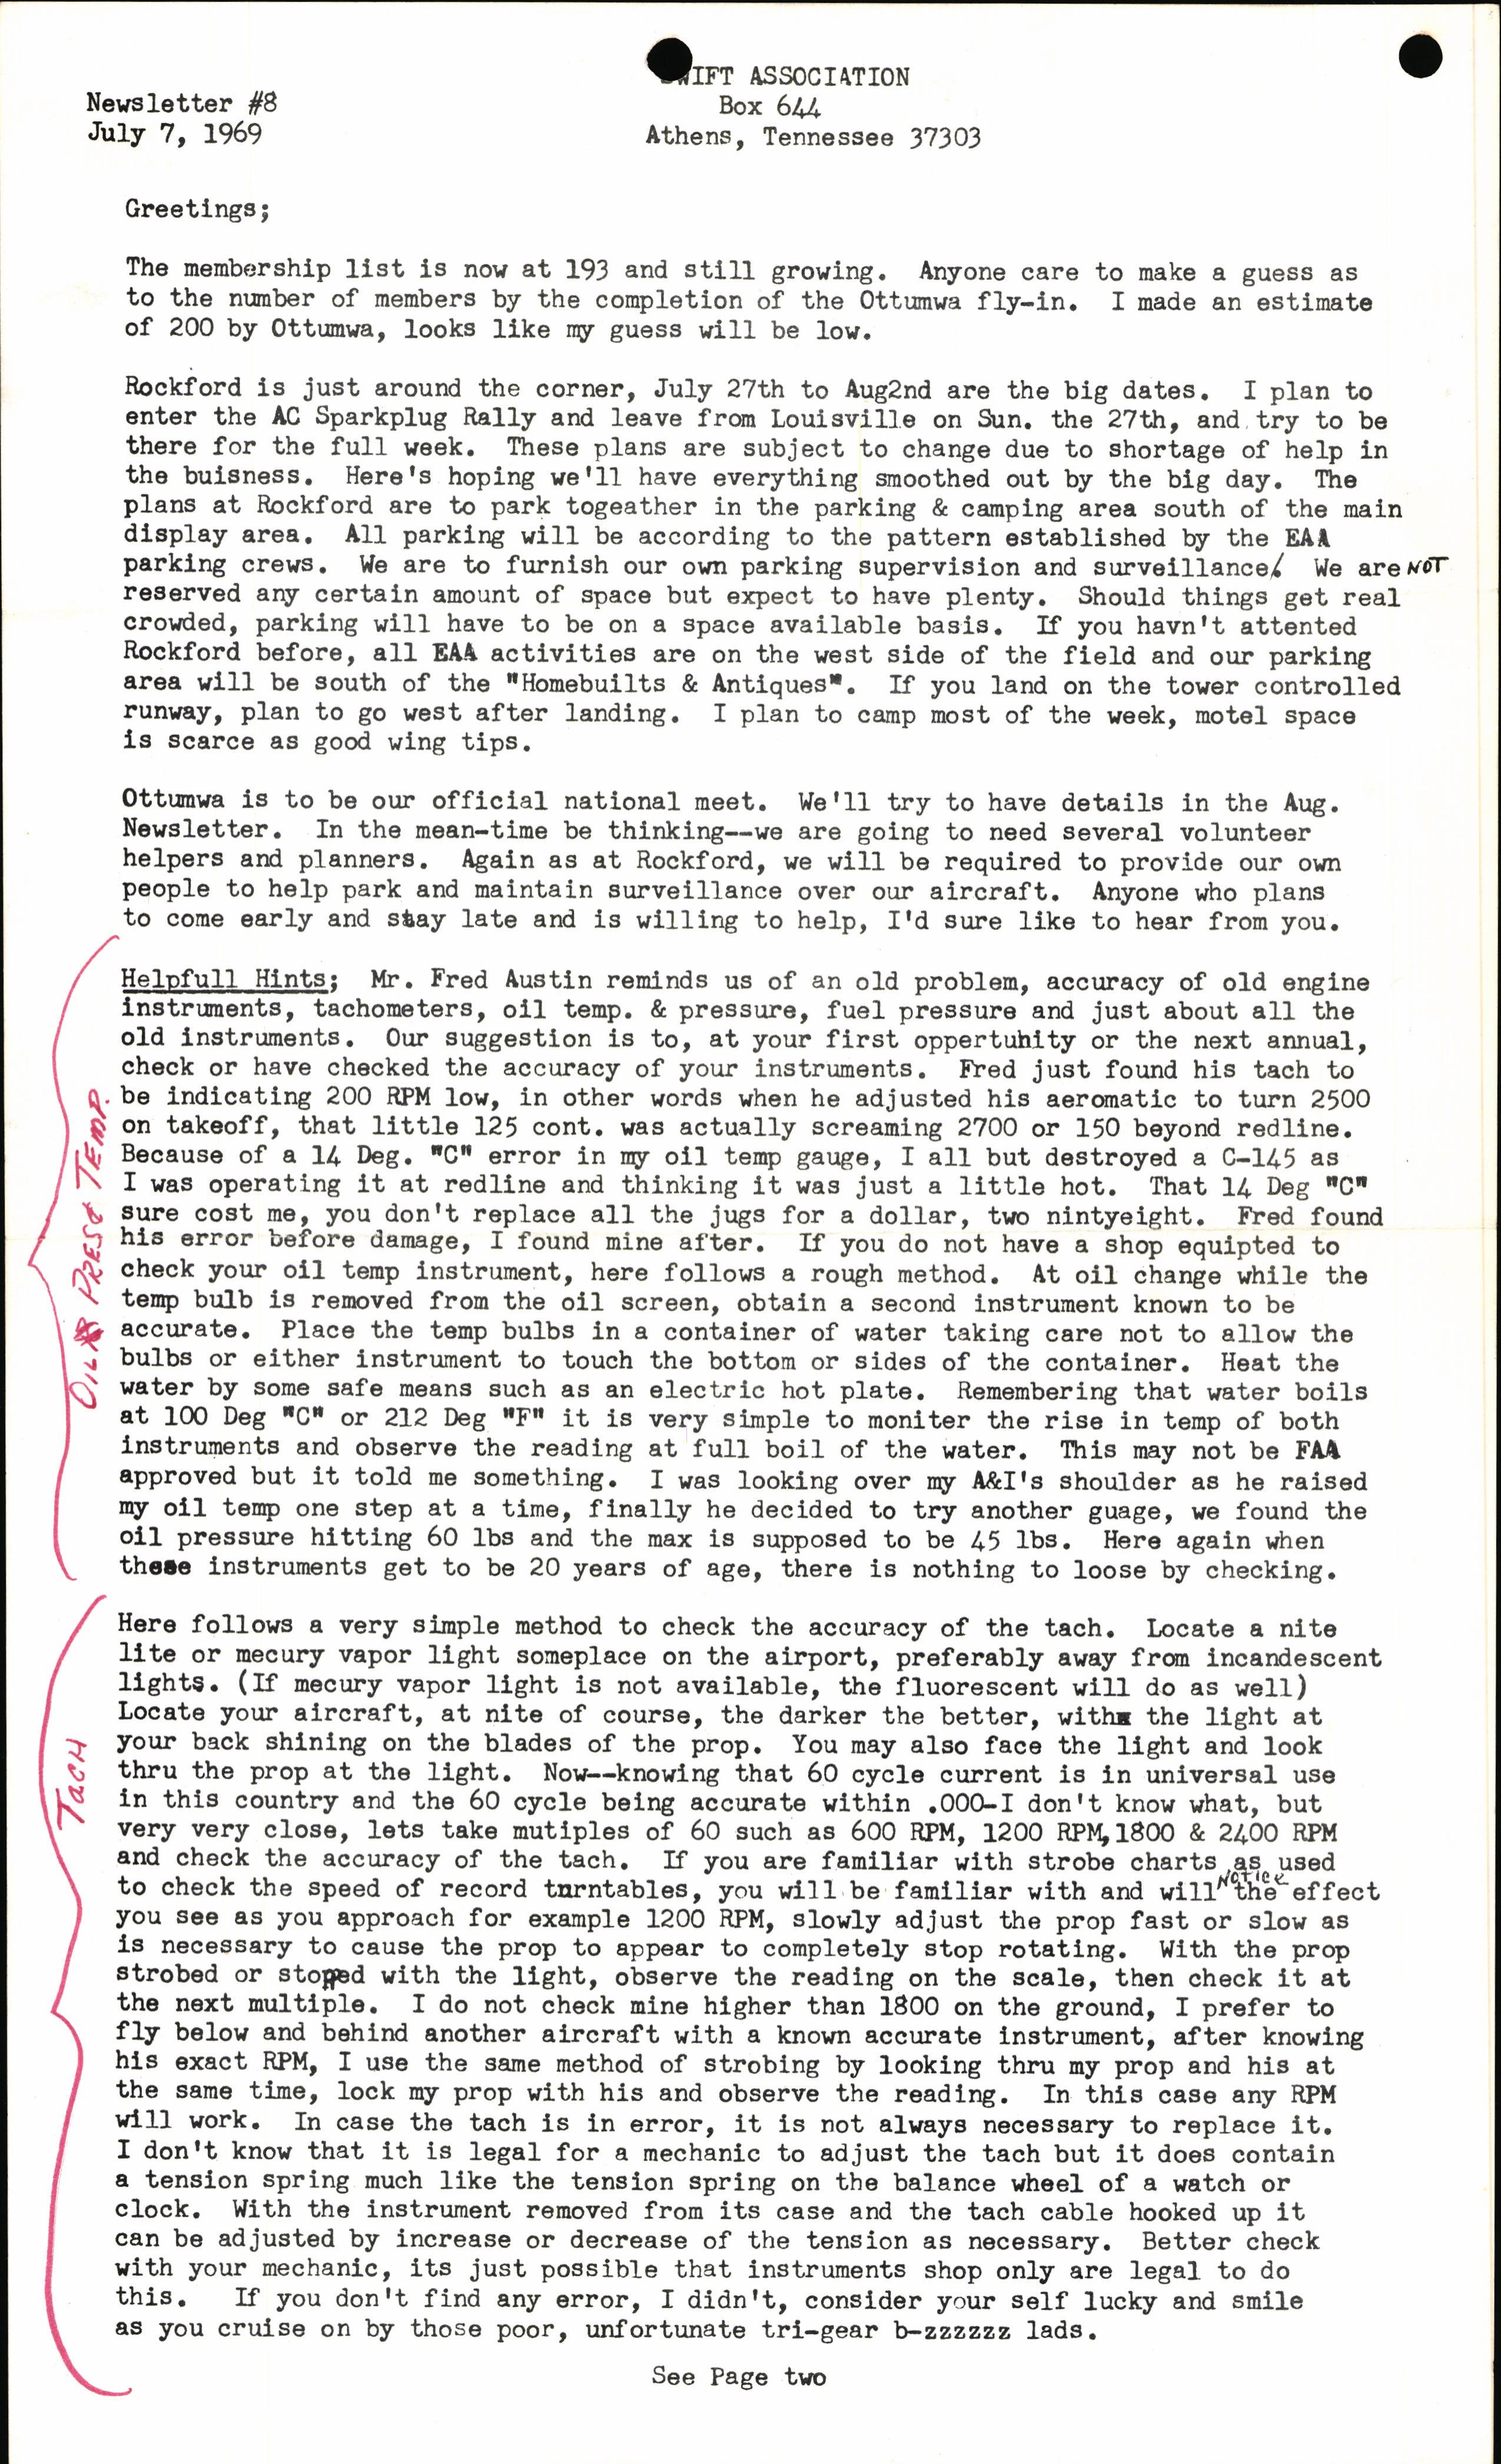 Sample page 1 from AirCorps Library document: July 1969